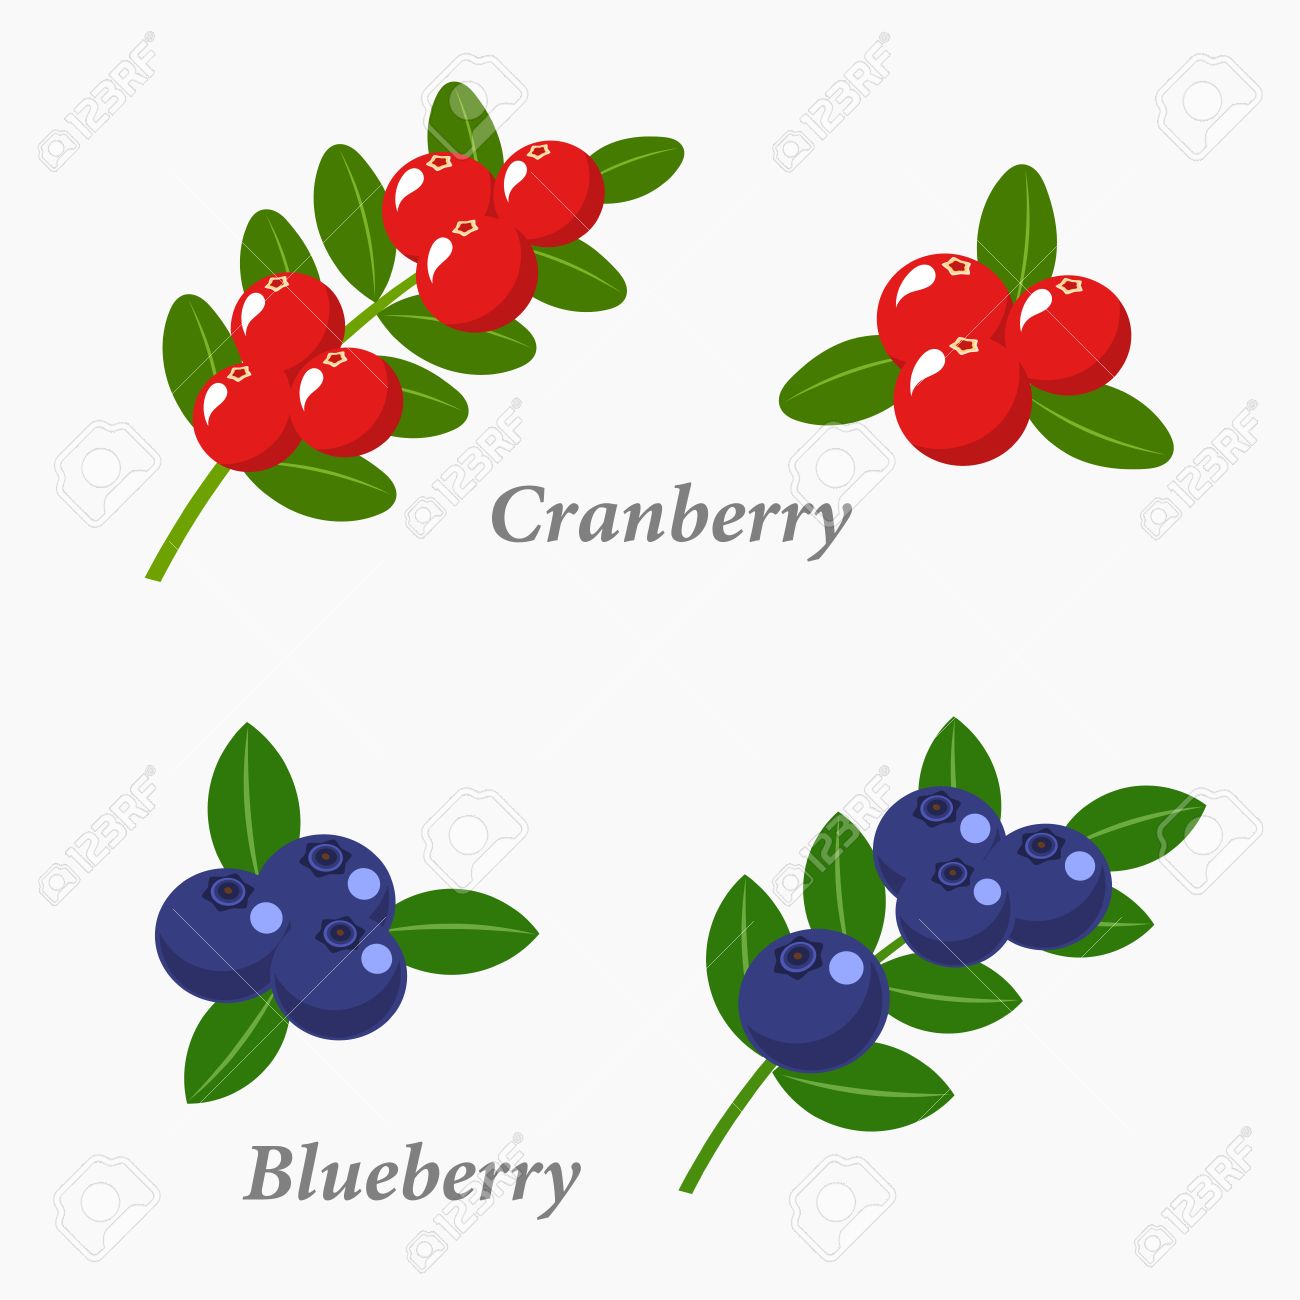 Free download best on. Blueberry clipart cranberry